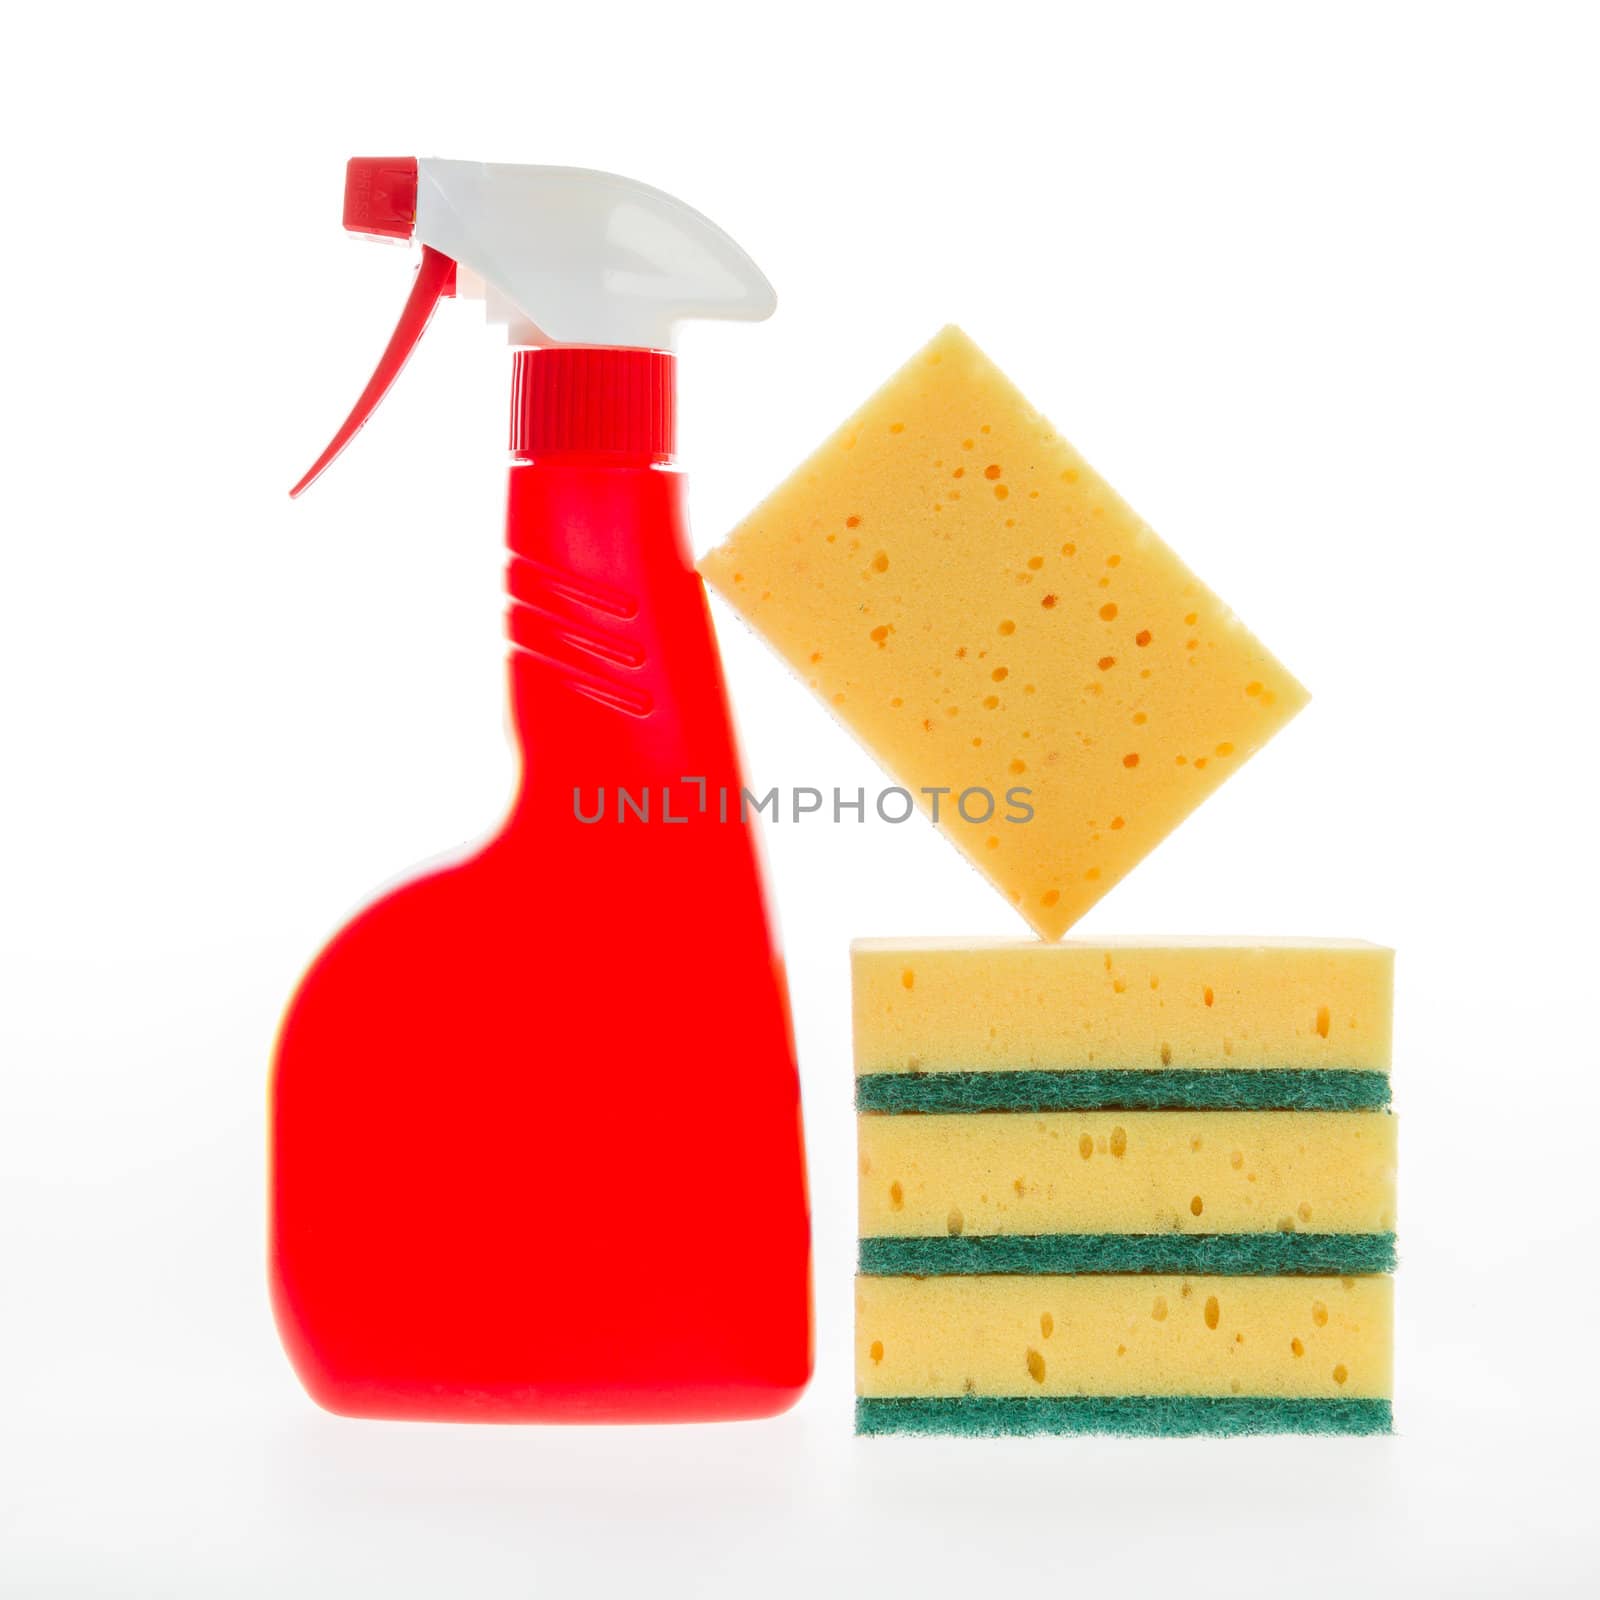 House cleaning product by michaklootwijk